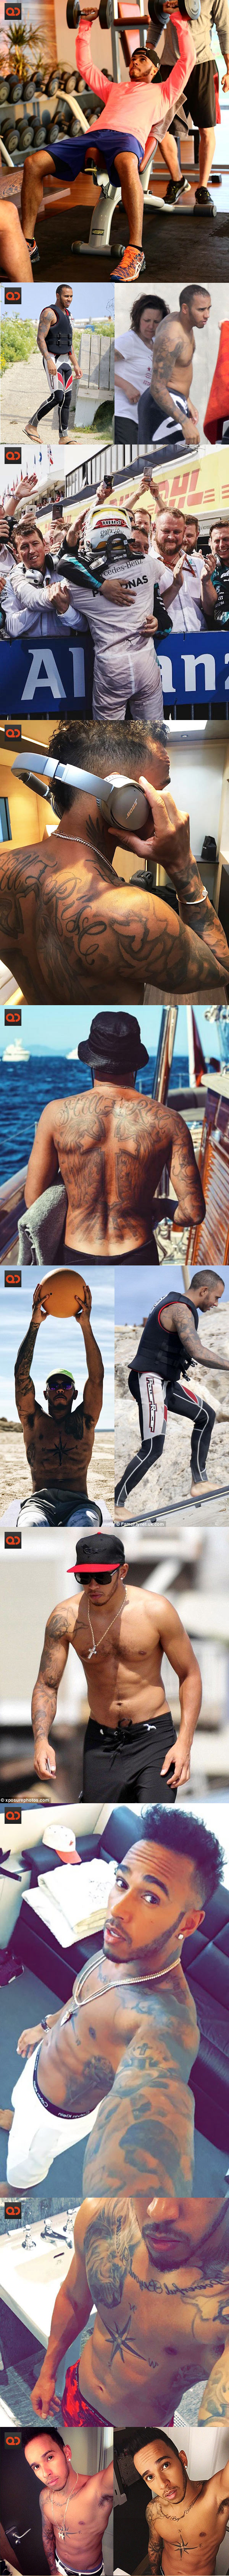 QC Crush: Lewis Hamilton - Let's Make A Pit Stop To Check His F1 Racer Bulge!